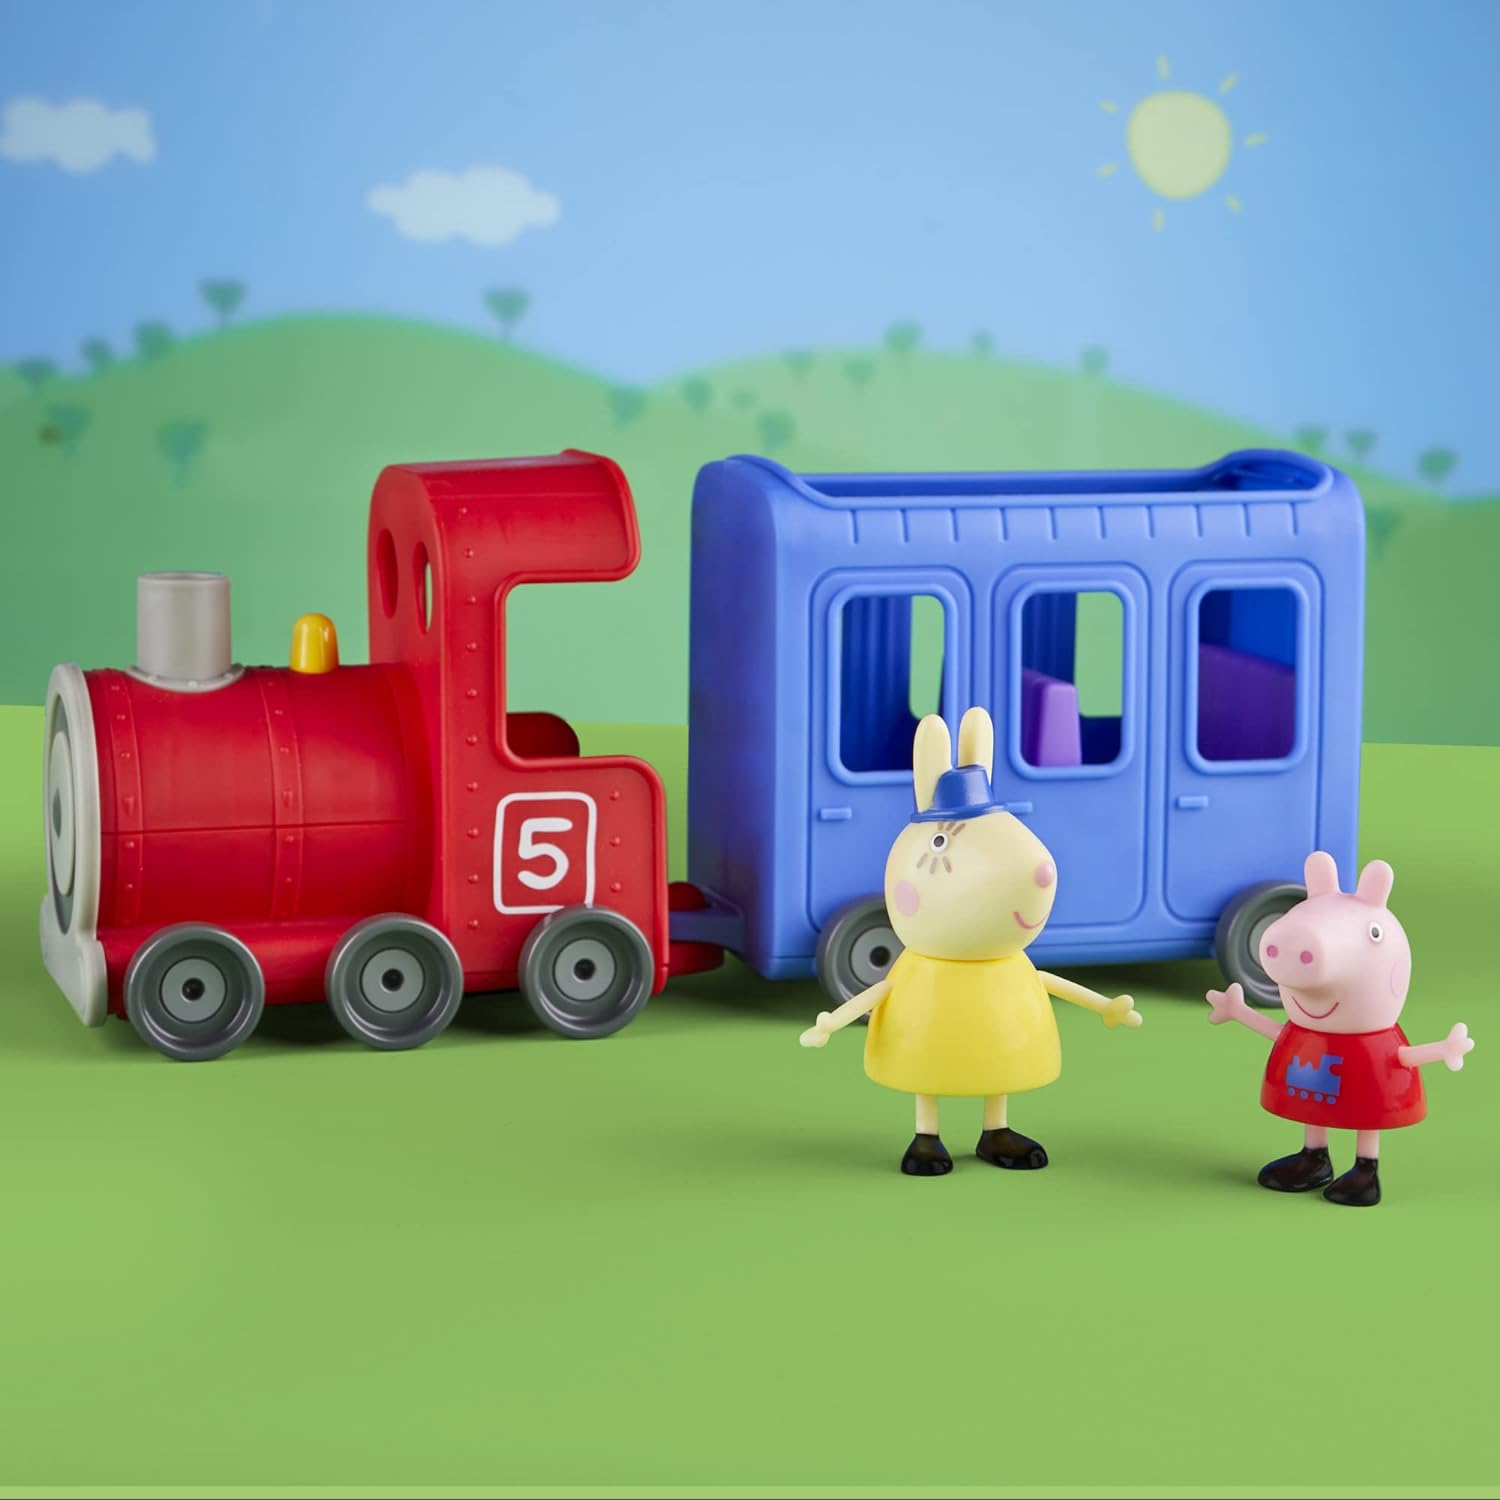 Peppa Pig Peppa’s Adventures Miss Rabbit’s Train 2-Part Detachable Vehicle Preschool Toy: 2 Figures, Rolling Wheels, for Ages 3 and Up